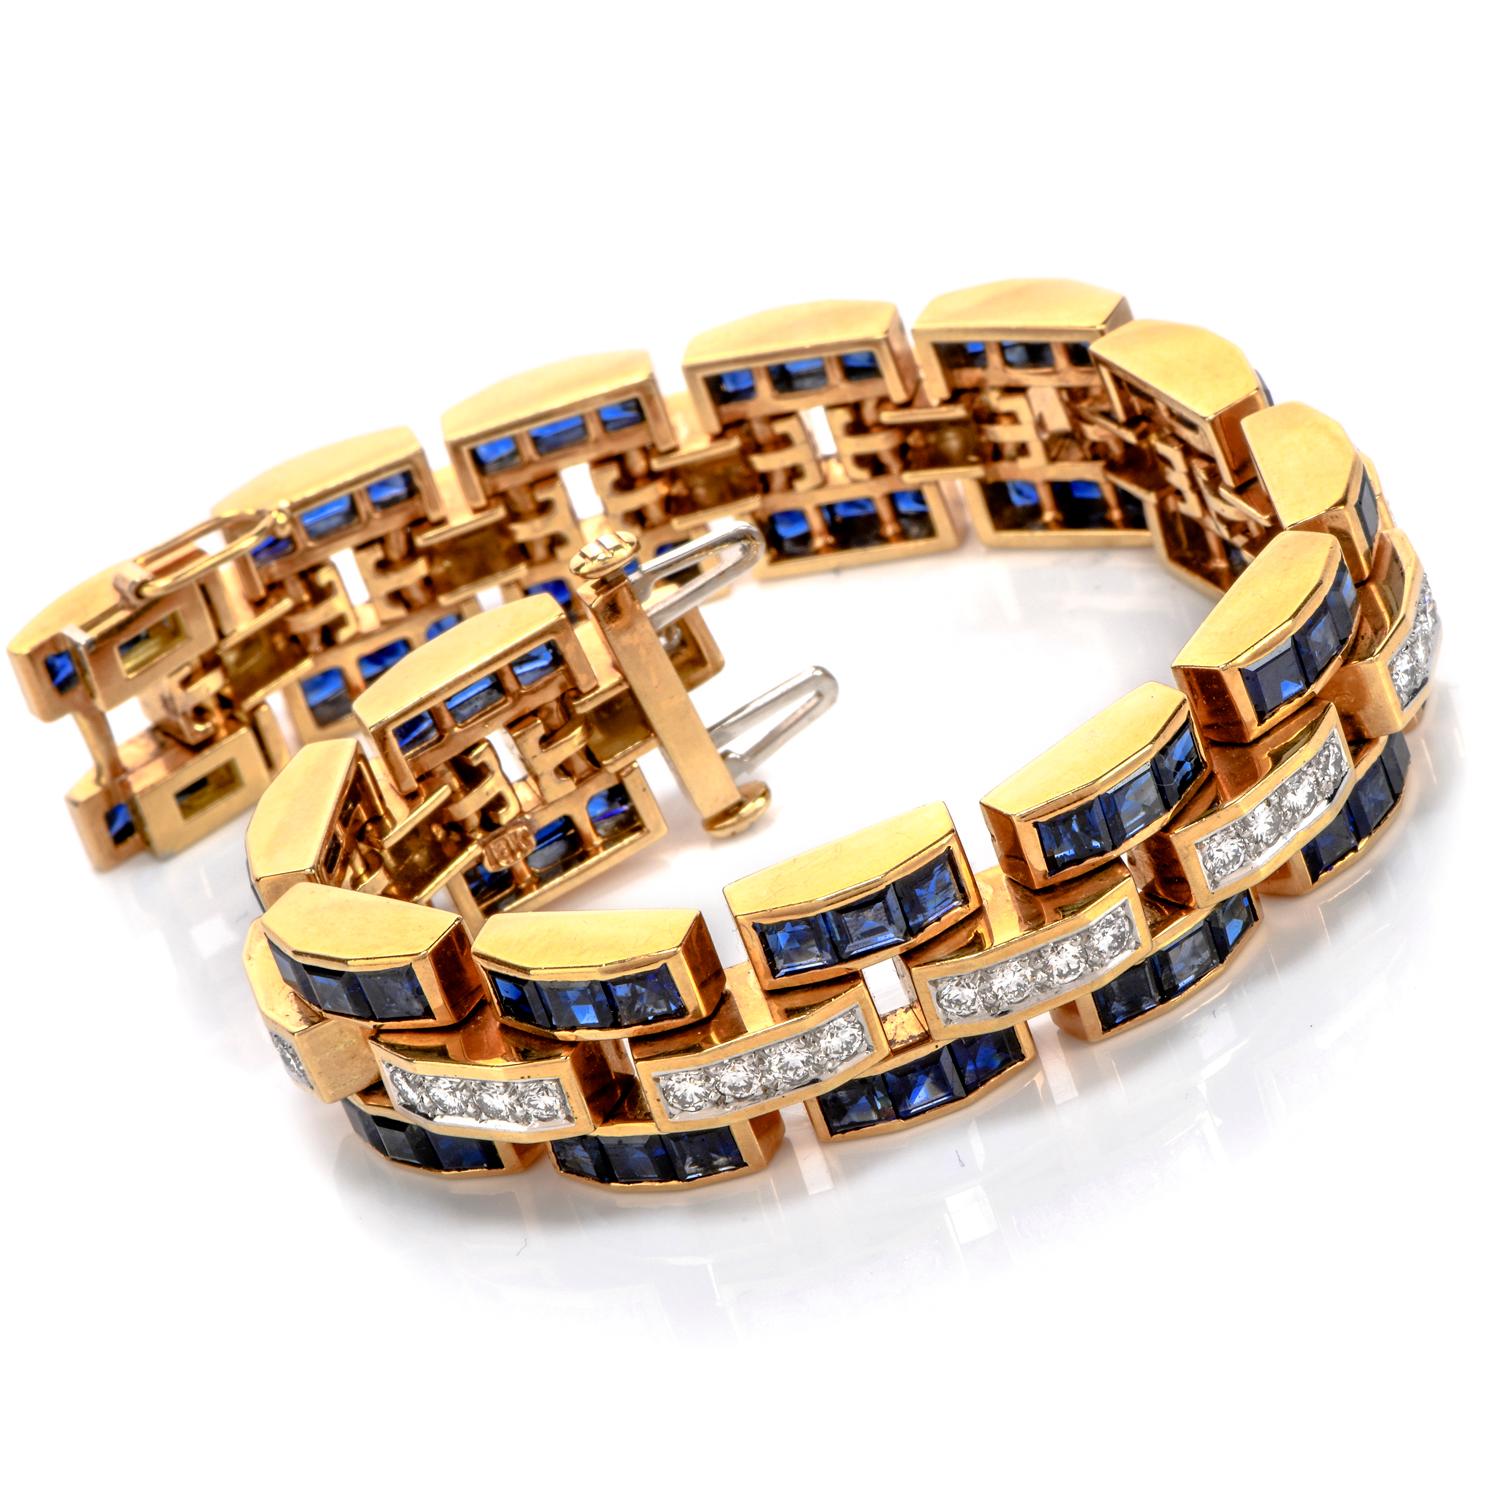  Feel unstoppable and gorgeous with this marvelous Vintage Diamond Sapphire 18K Gold Wide Link Bracelet! 

This bracelet is crafted in 18 karat yellow gold.  There are approximately 56 genuine sparkling diamonds, round cut, pave set, totaling 3.30